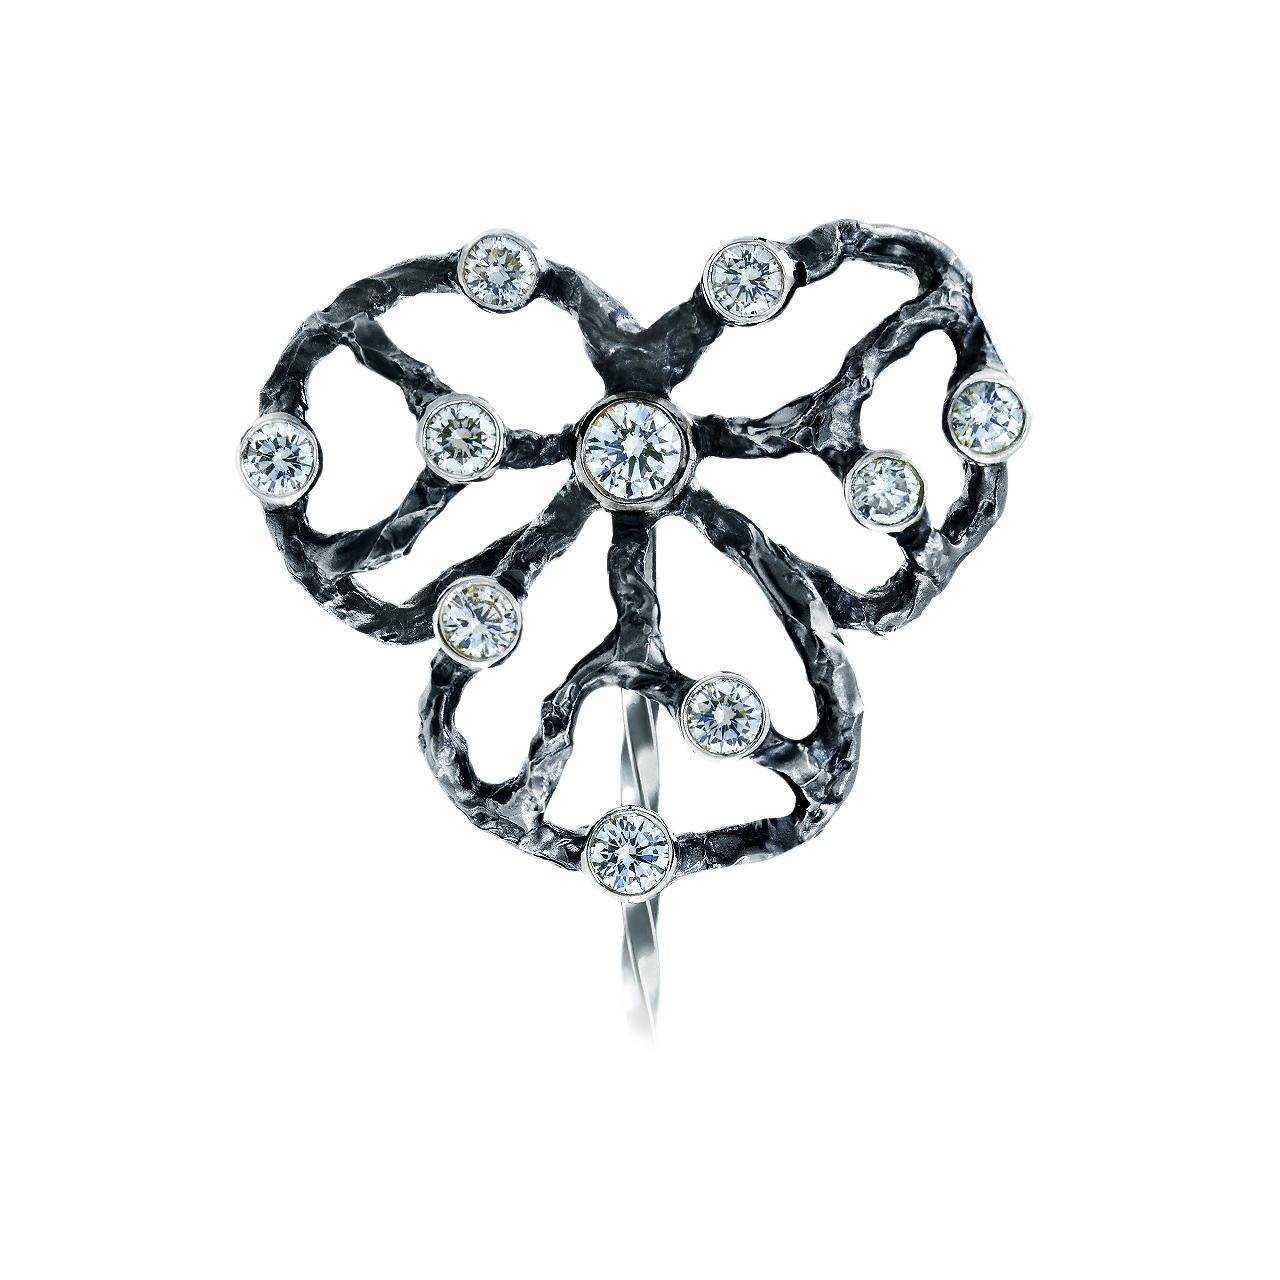 - 10 Round Diamonds - 0.47 ct, D-F/ VVS1-VVS2
- 18K White Gold 
- Weight: 5.22 g
This Pin is made in the author’s manner using blackened 18K white gold with a special facture. Jewellery Theatre creates the graceful butterfly decorated with a